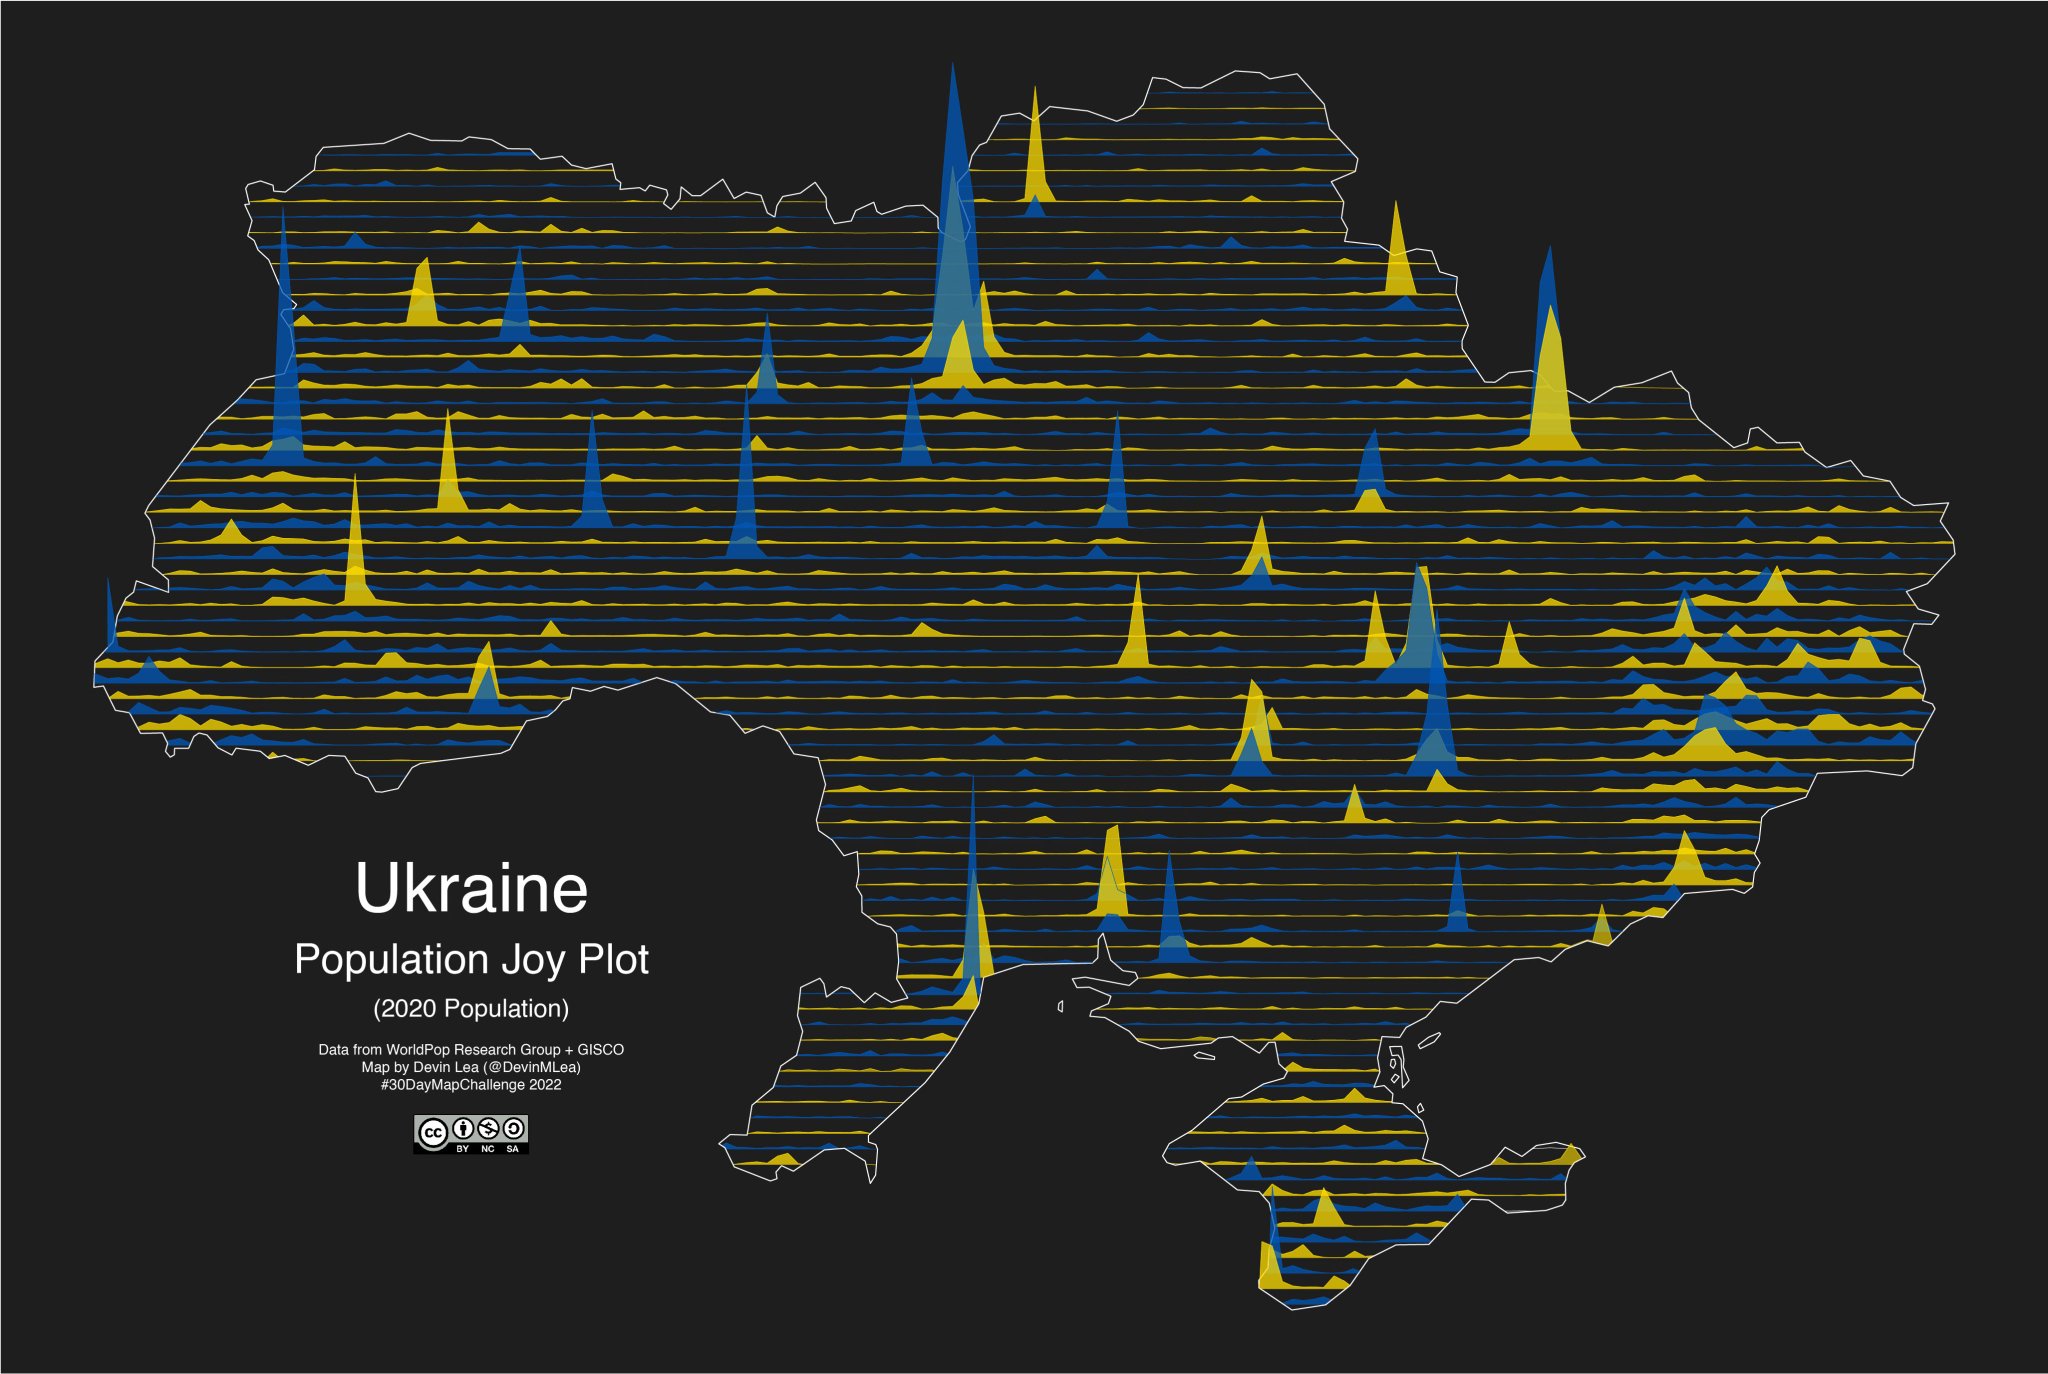 Map of Ukraine where horizontal lines across the country are vertically exaggerated based on the proportion of population in the area. Population is based on 2020 data. The lines have alternating blue and yellow fill, same colors as Ukraine flag.